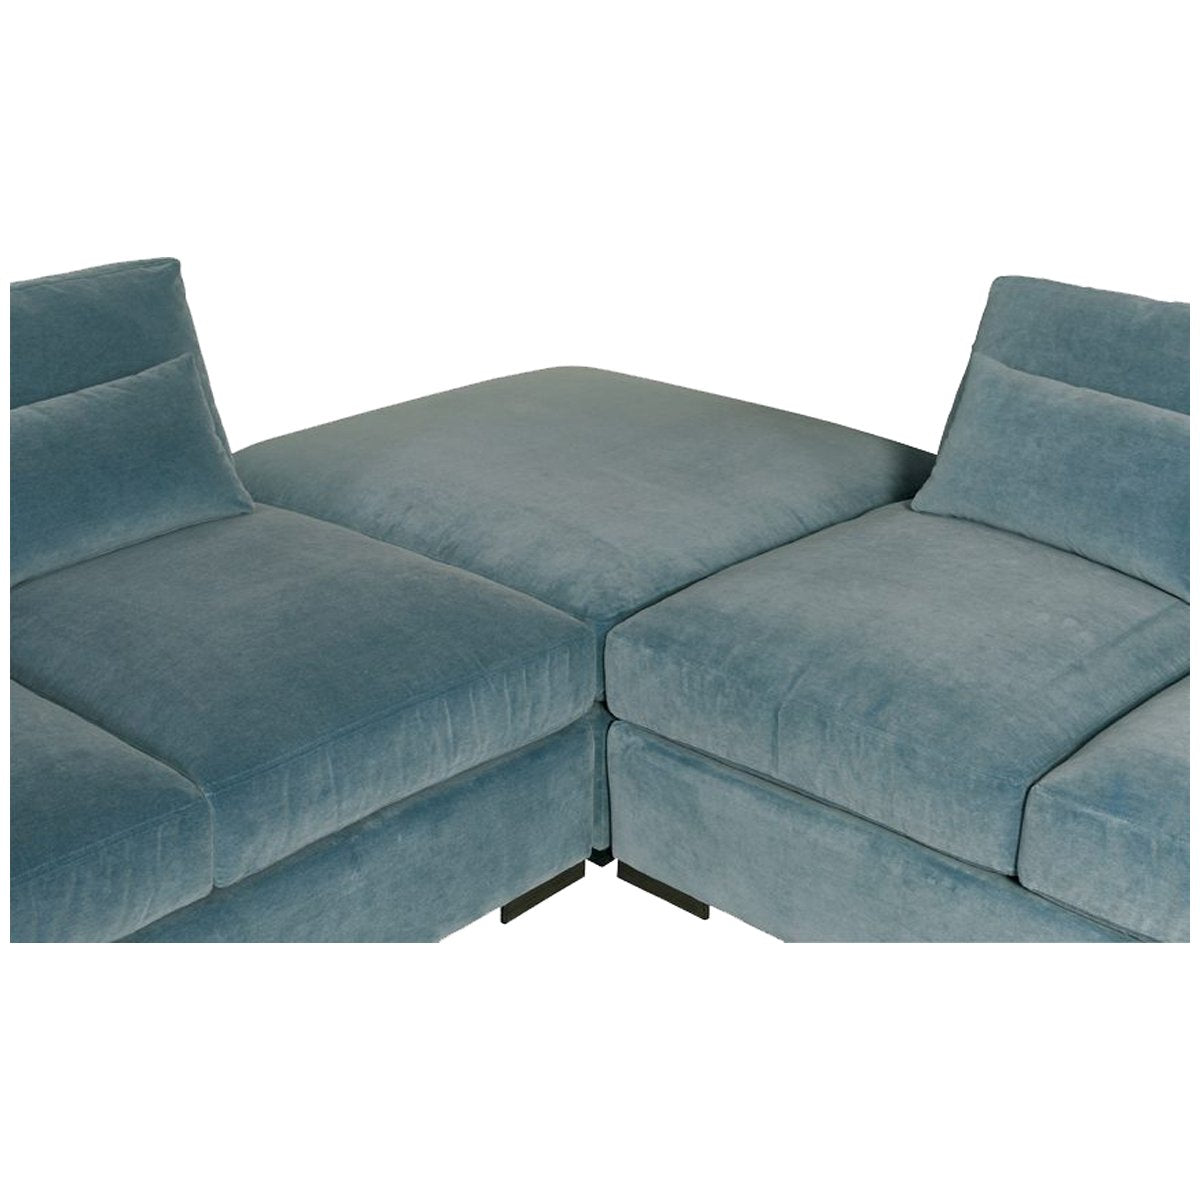 Lillian August Corso Three-Piece Sectional